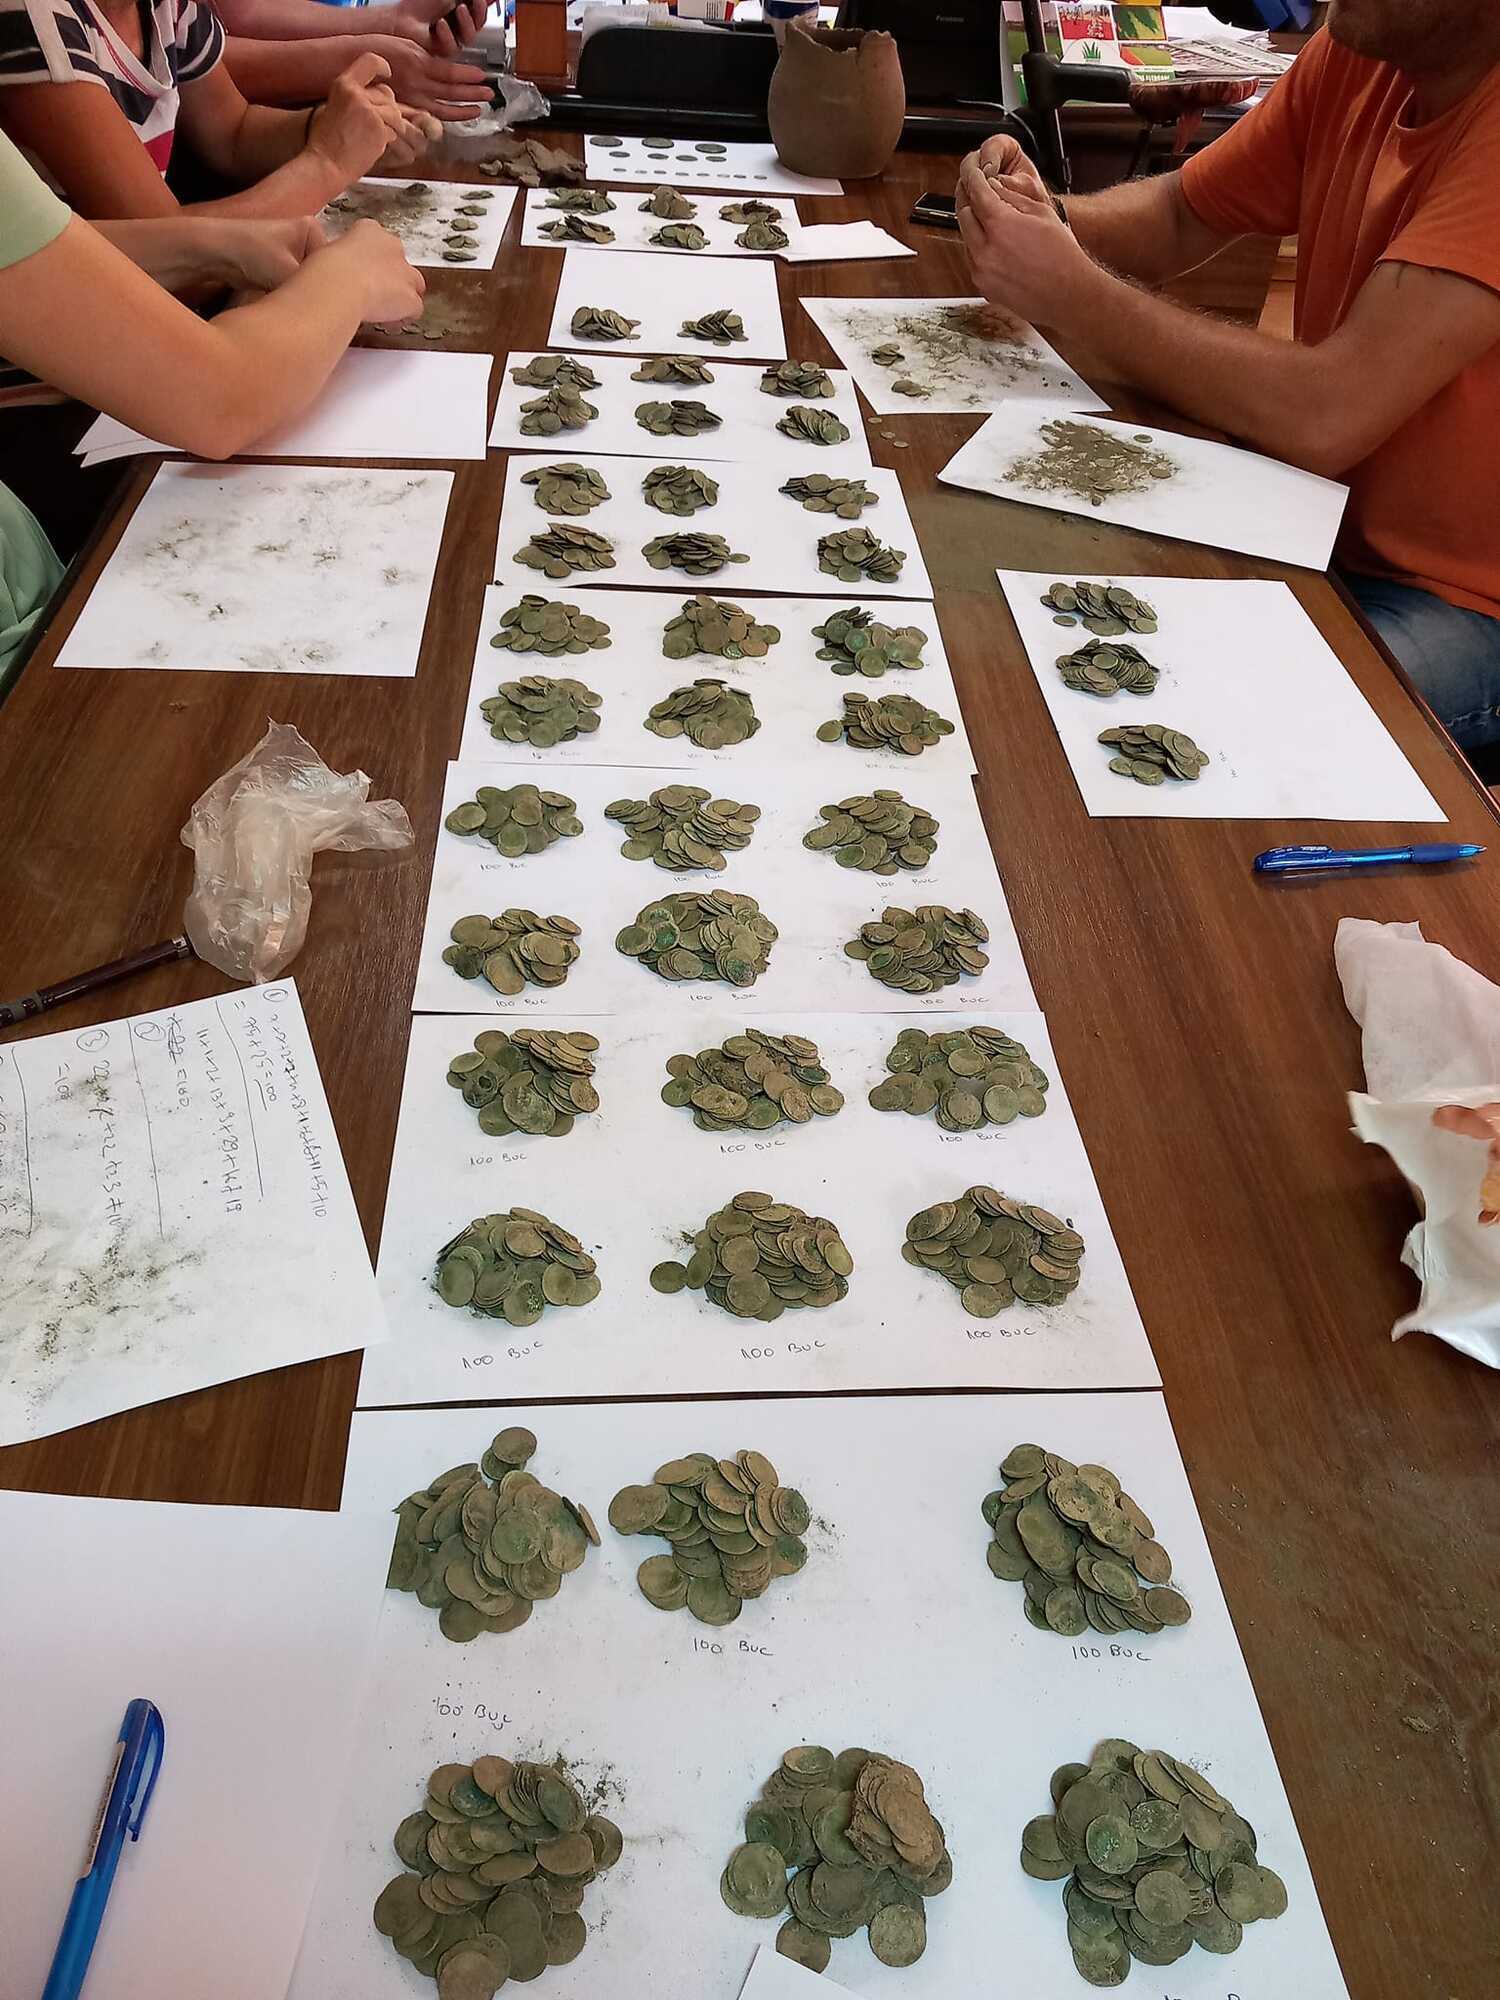 In Romania, metal detectors found a treasure with medieval coins in the forest (photo)